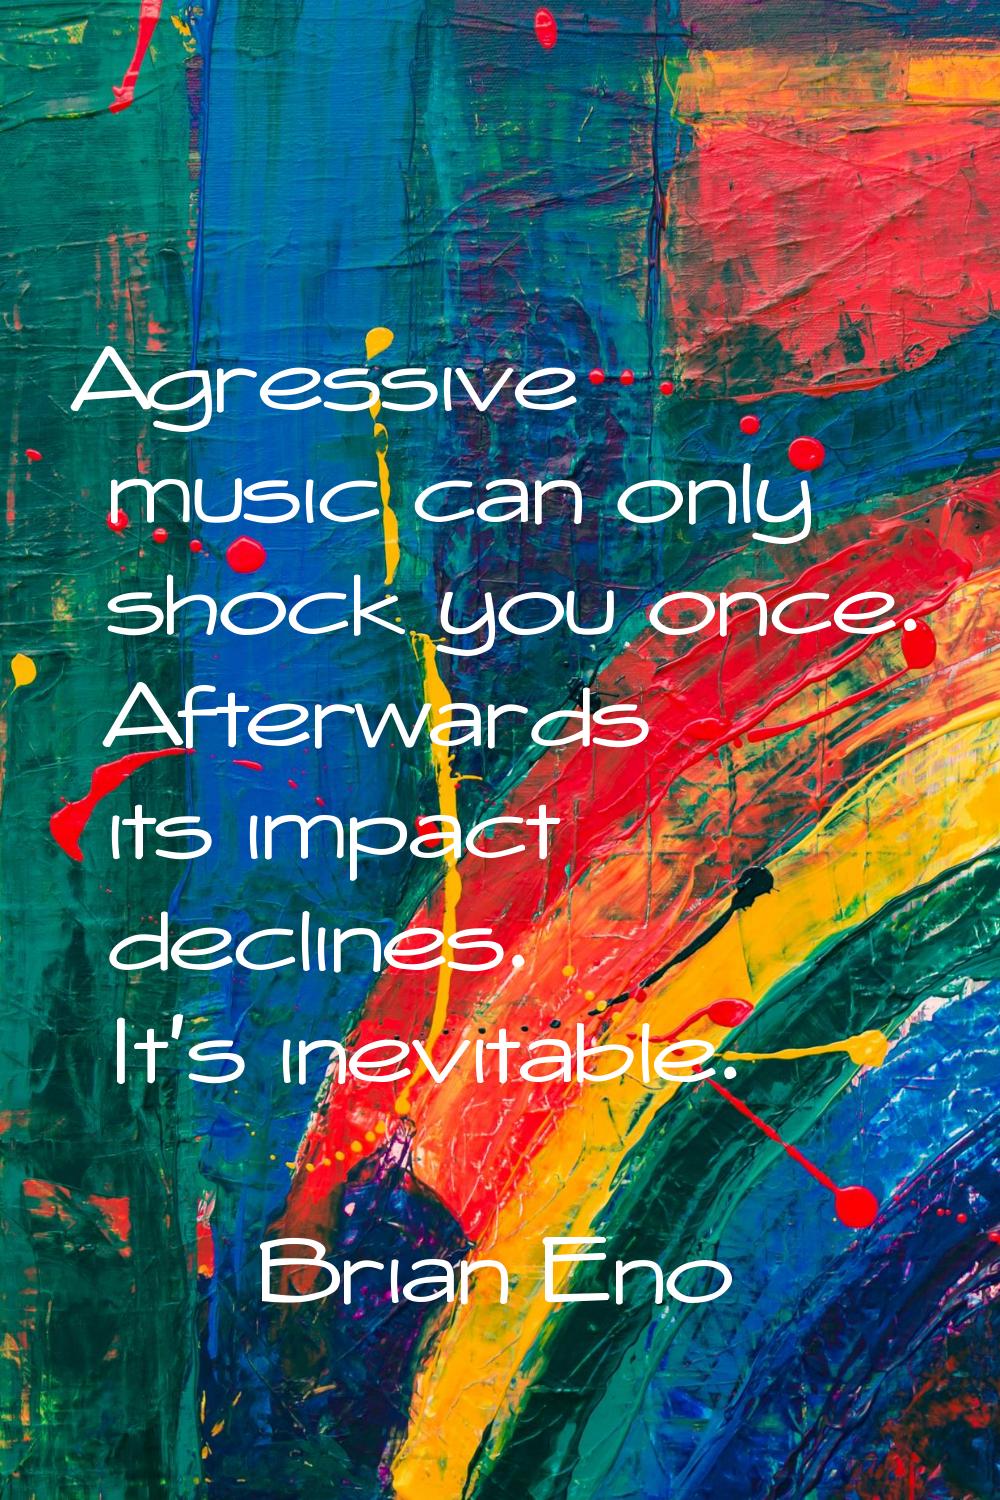 Agressive music can only shock you once. Afterwards its impact declines. It's inevitable.